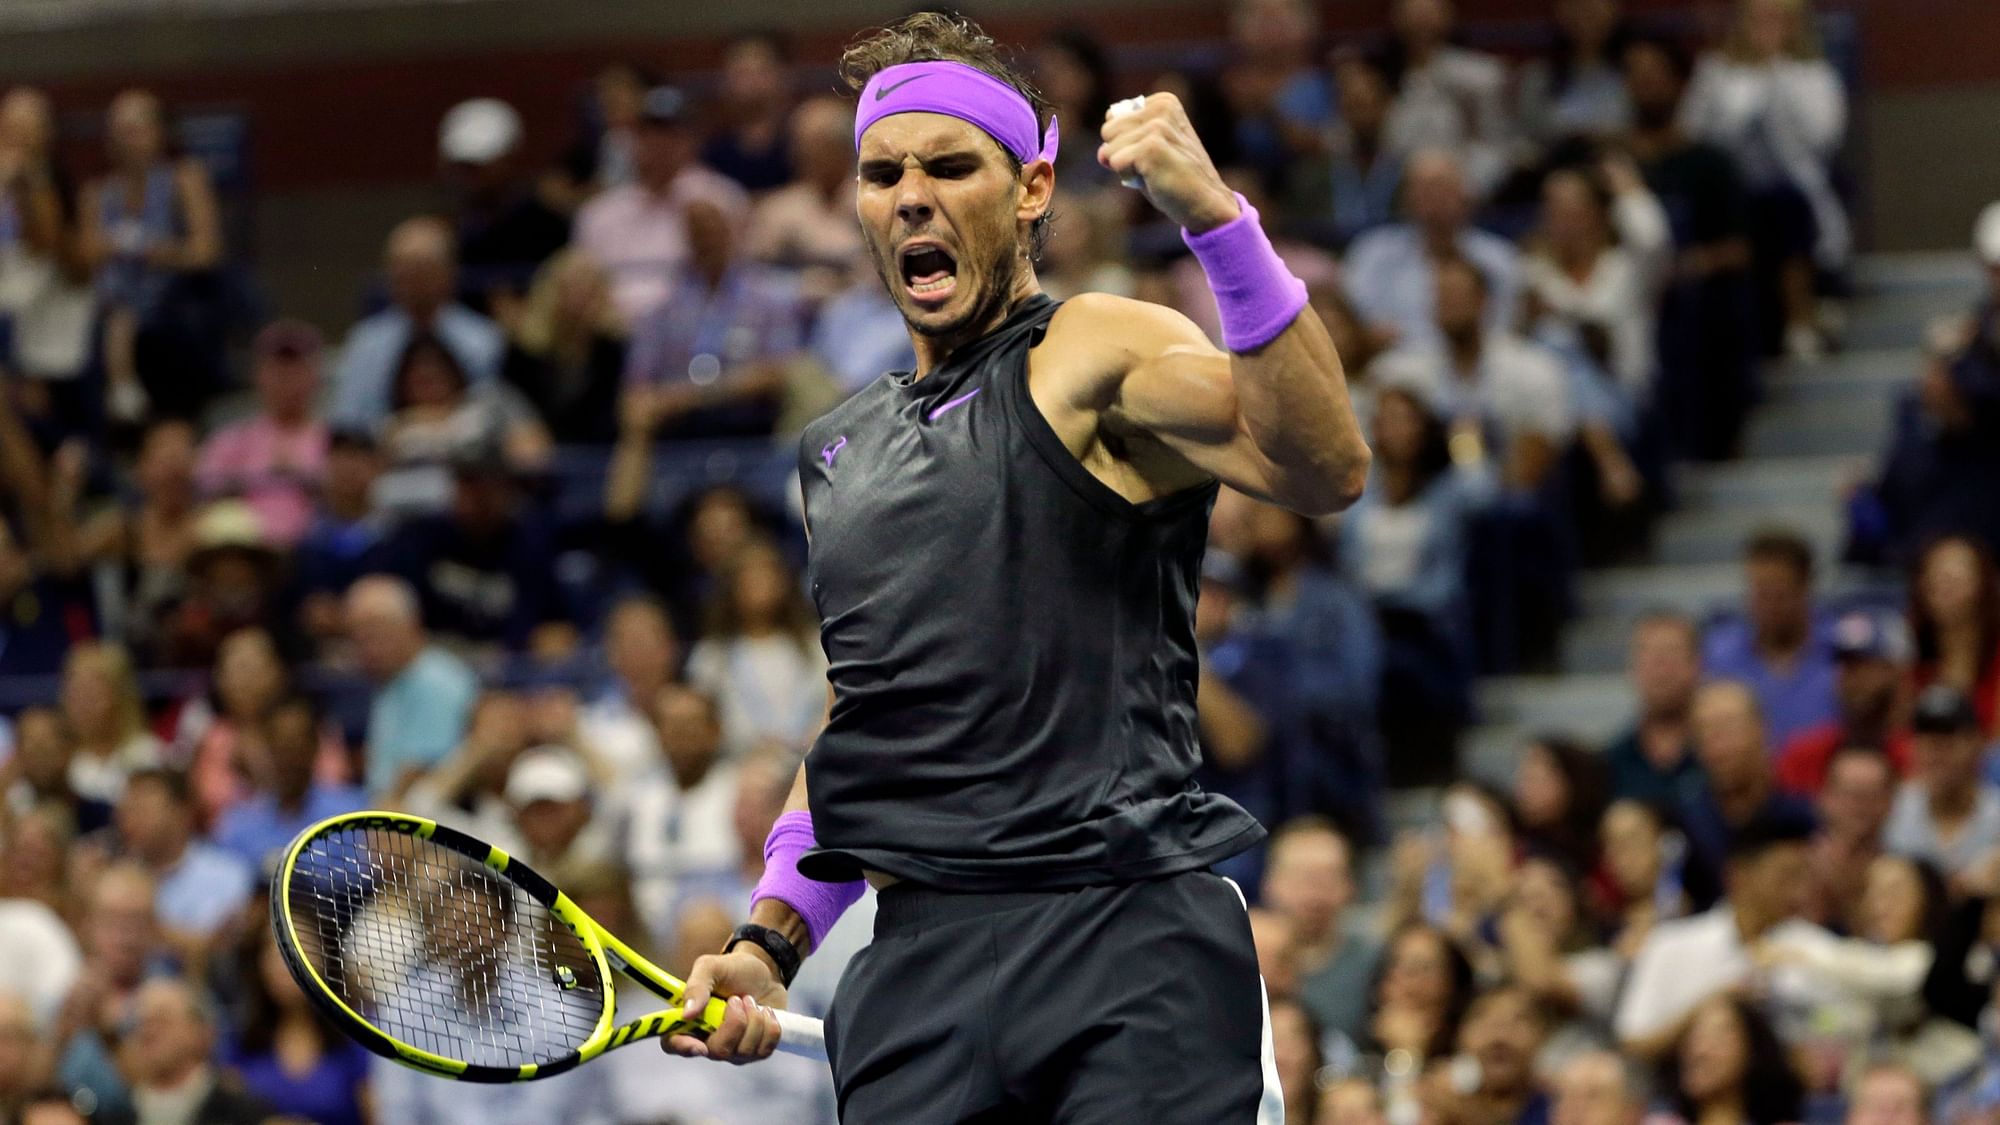  Nadal battled past Marin Cilic 6-3, 3-6, 6-1, 6-2 to reach the last eight at the Flushing Meadows for the ninth time.